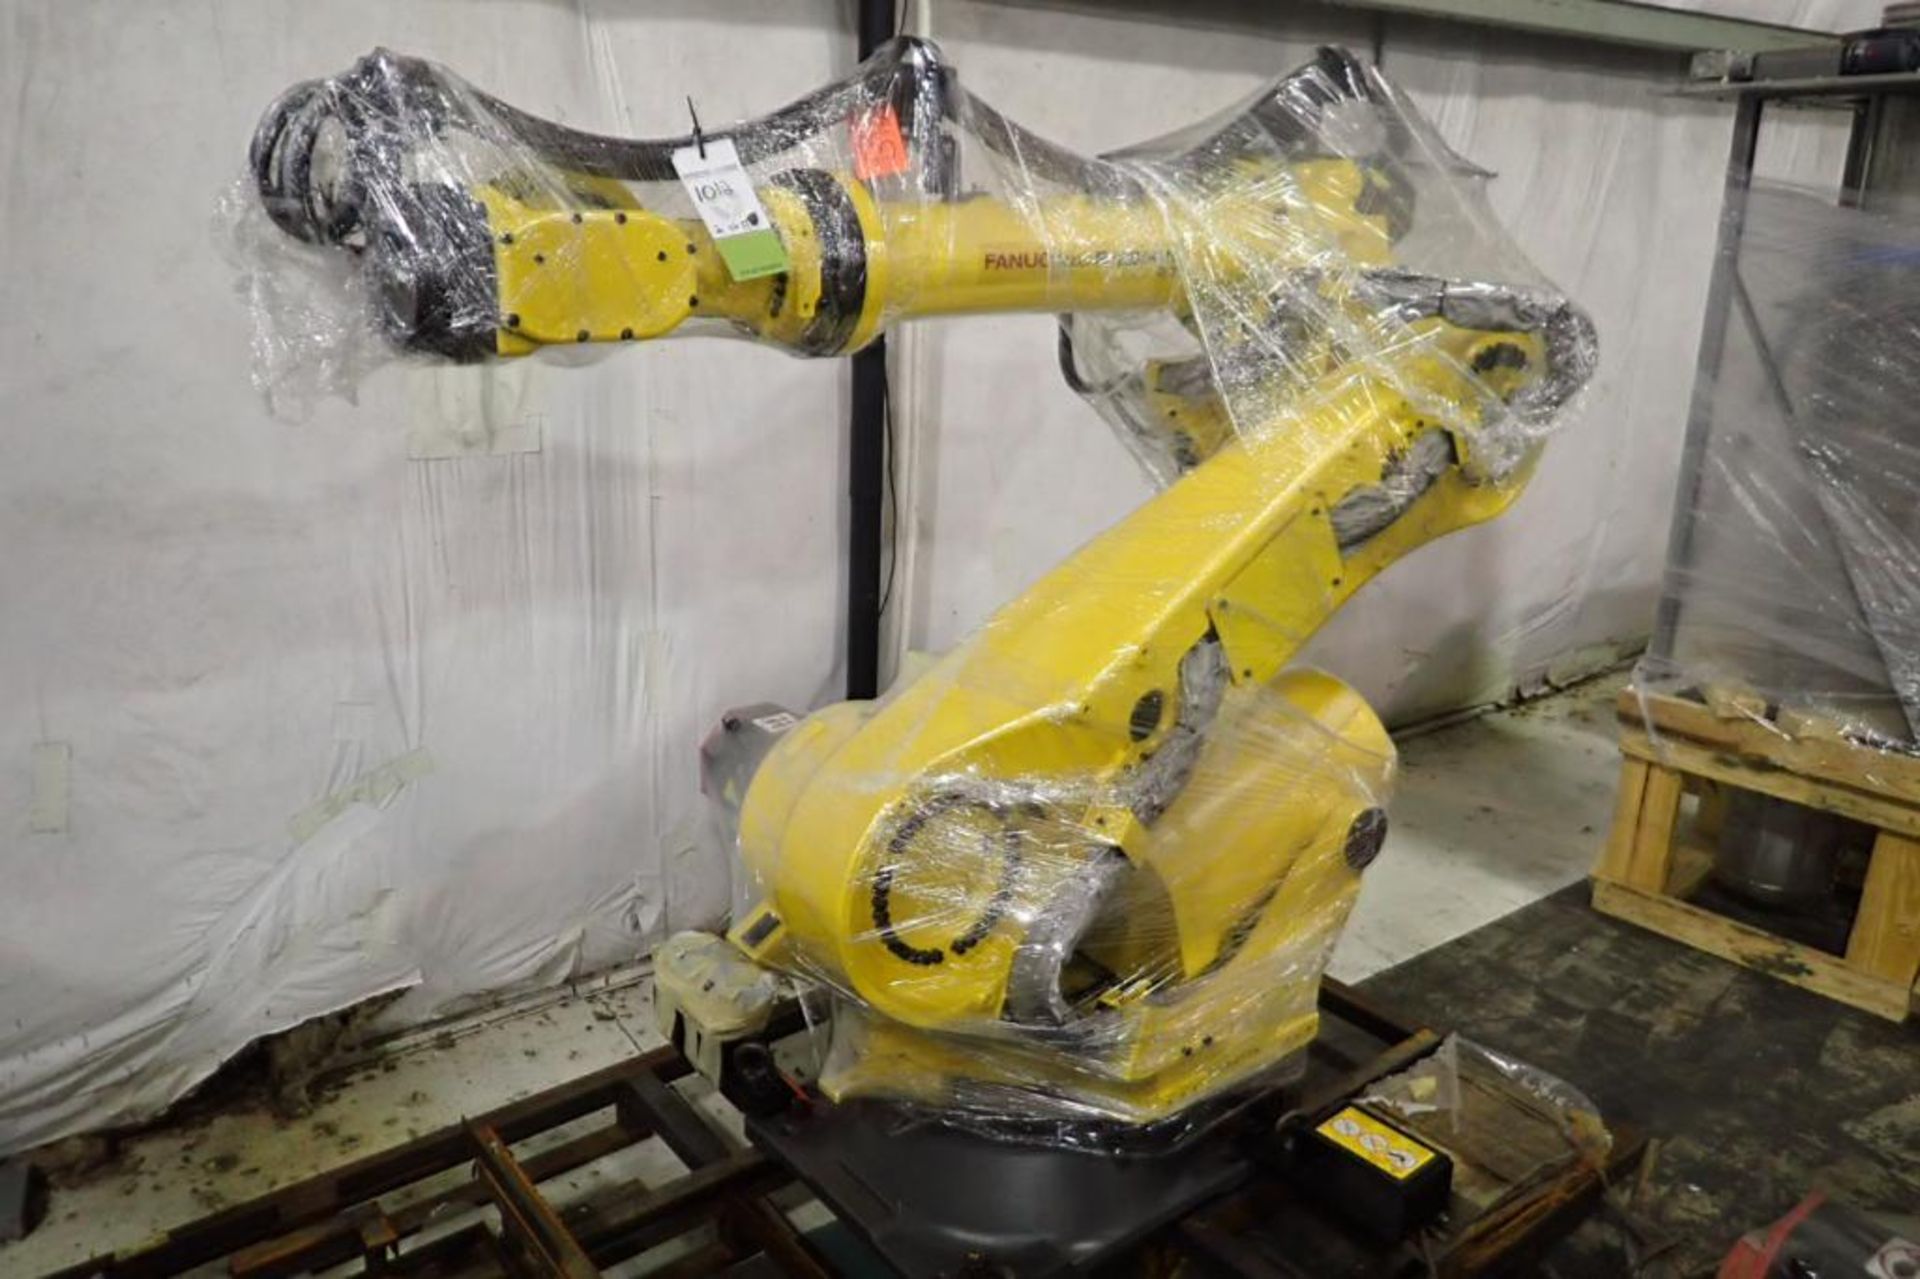 NEW Fanuc robot depalletizing system, Robot R-2000iC210F robot arms with pedestals, control panel, i